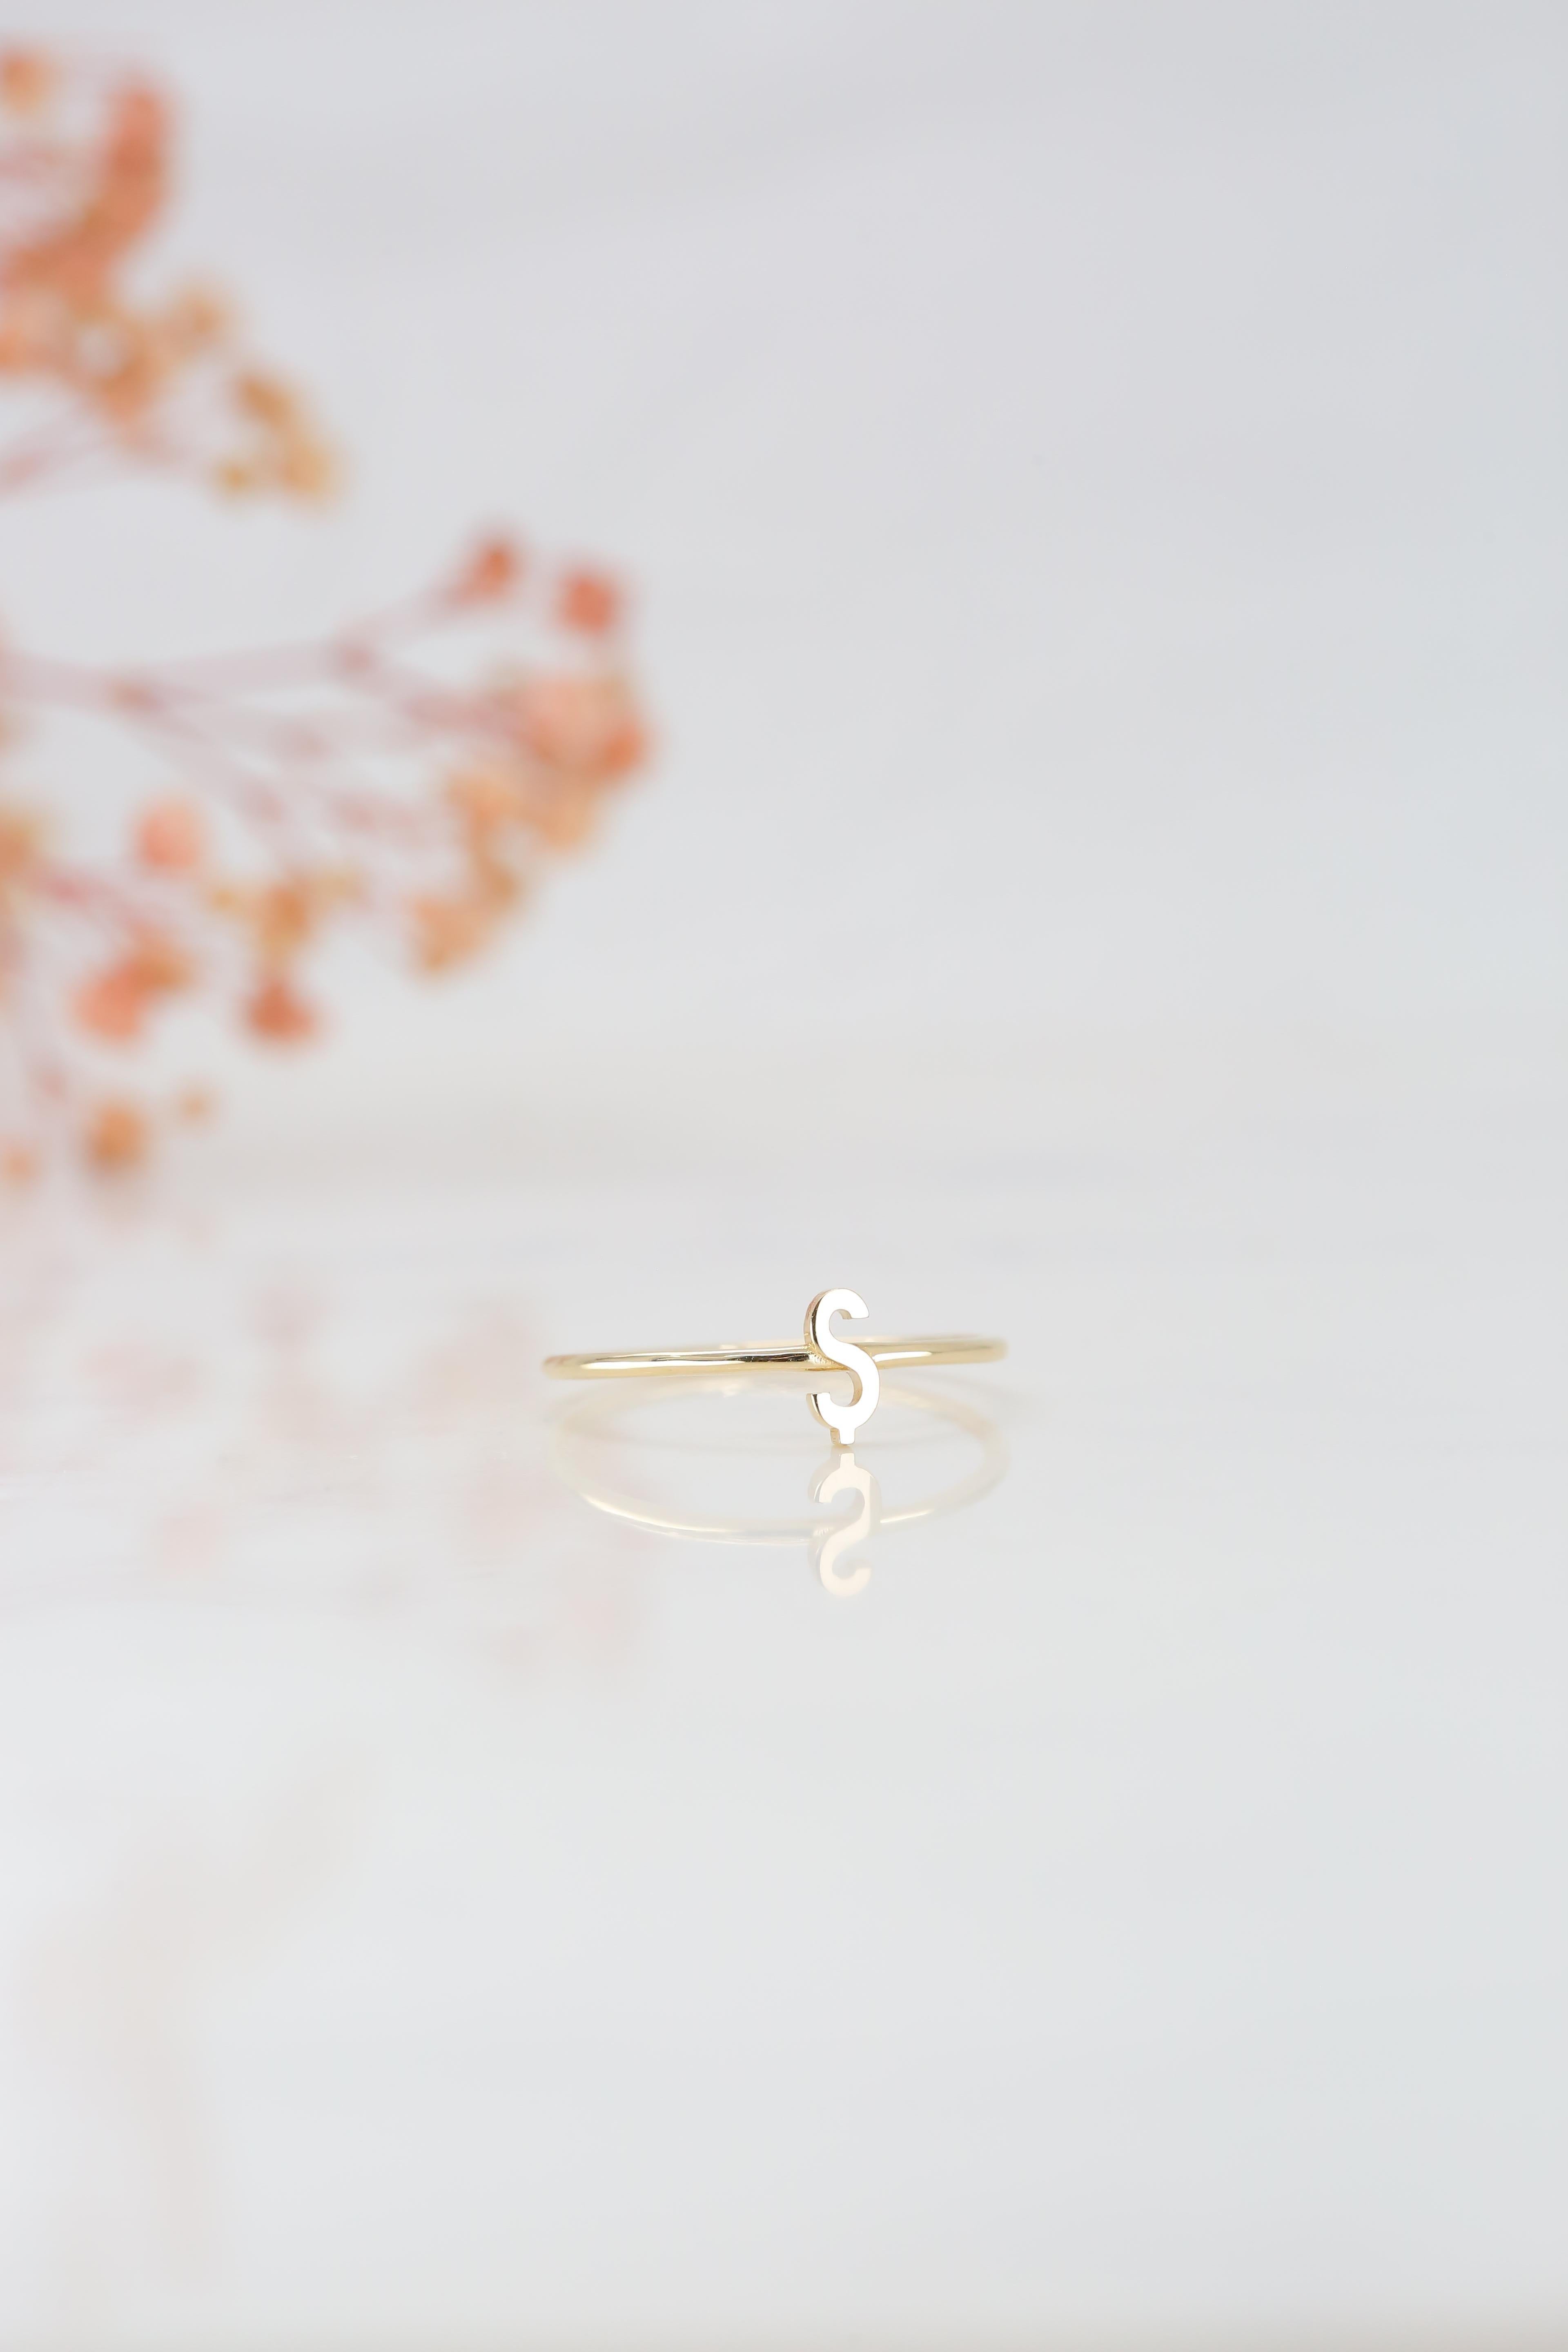 For Sale:  14K Gold Initial Ş Letter Ring, Personalized Initial Letter Ring 7